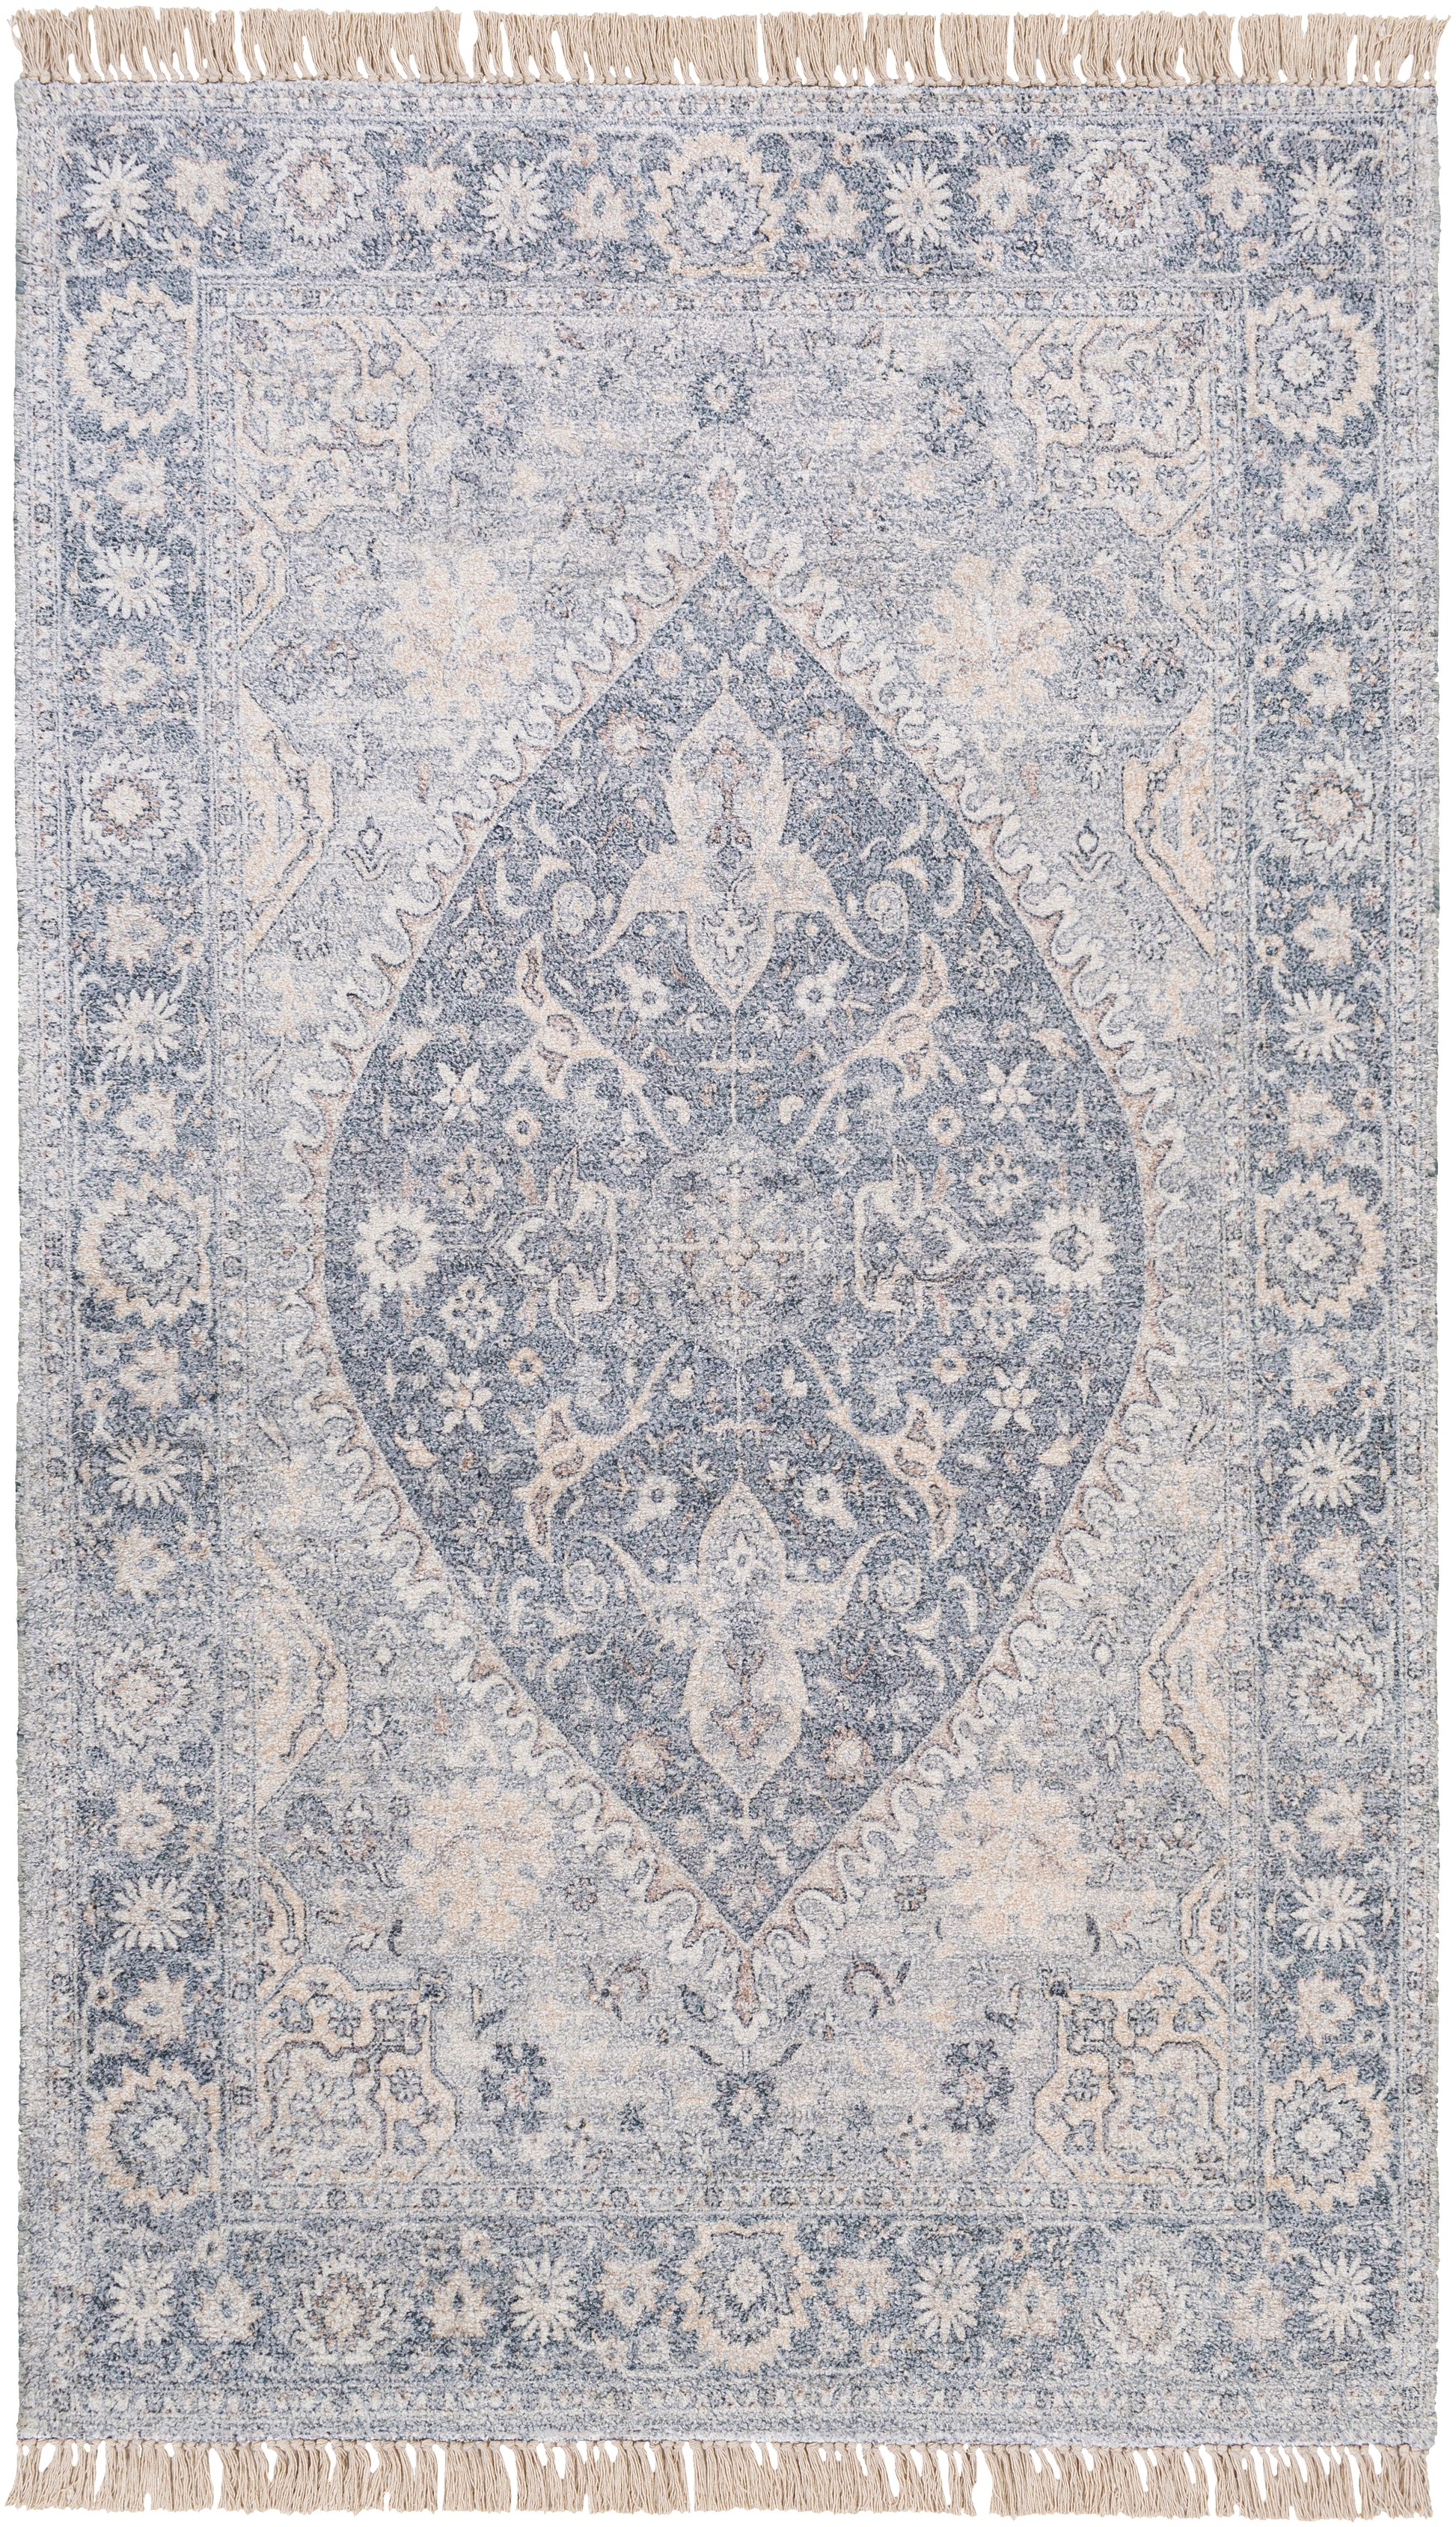 Sivas 26031 Hand Woven Synthetic Blend Indoor Area Rug by Surya Rugs | Area Rug